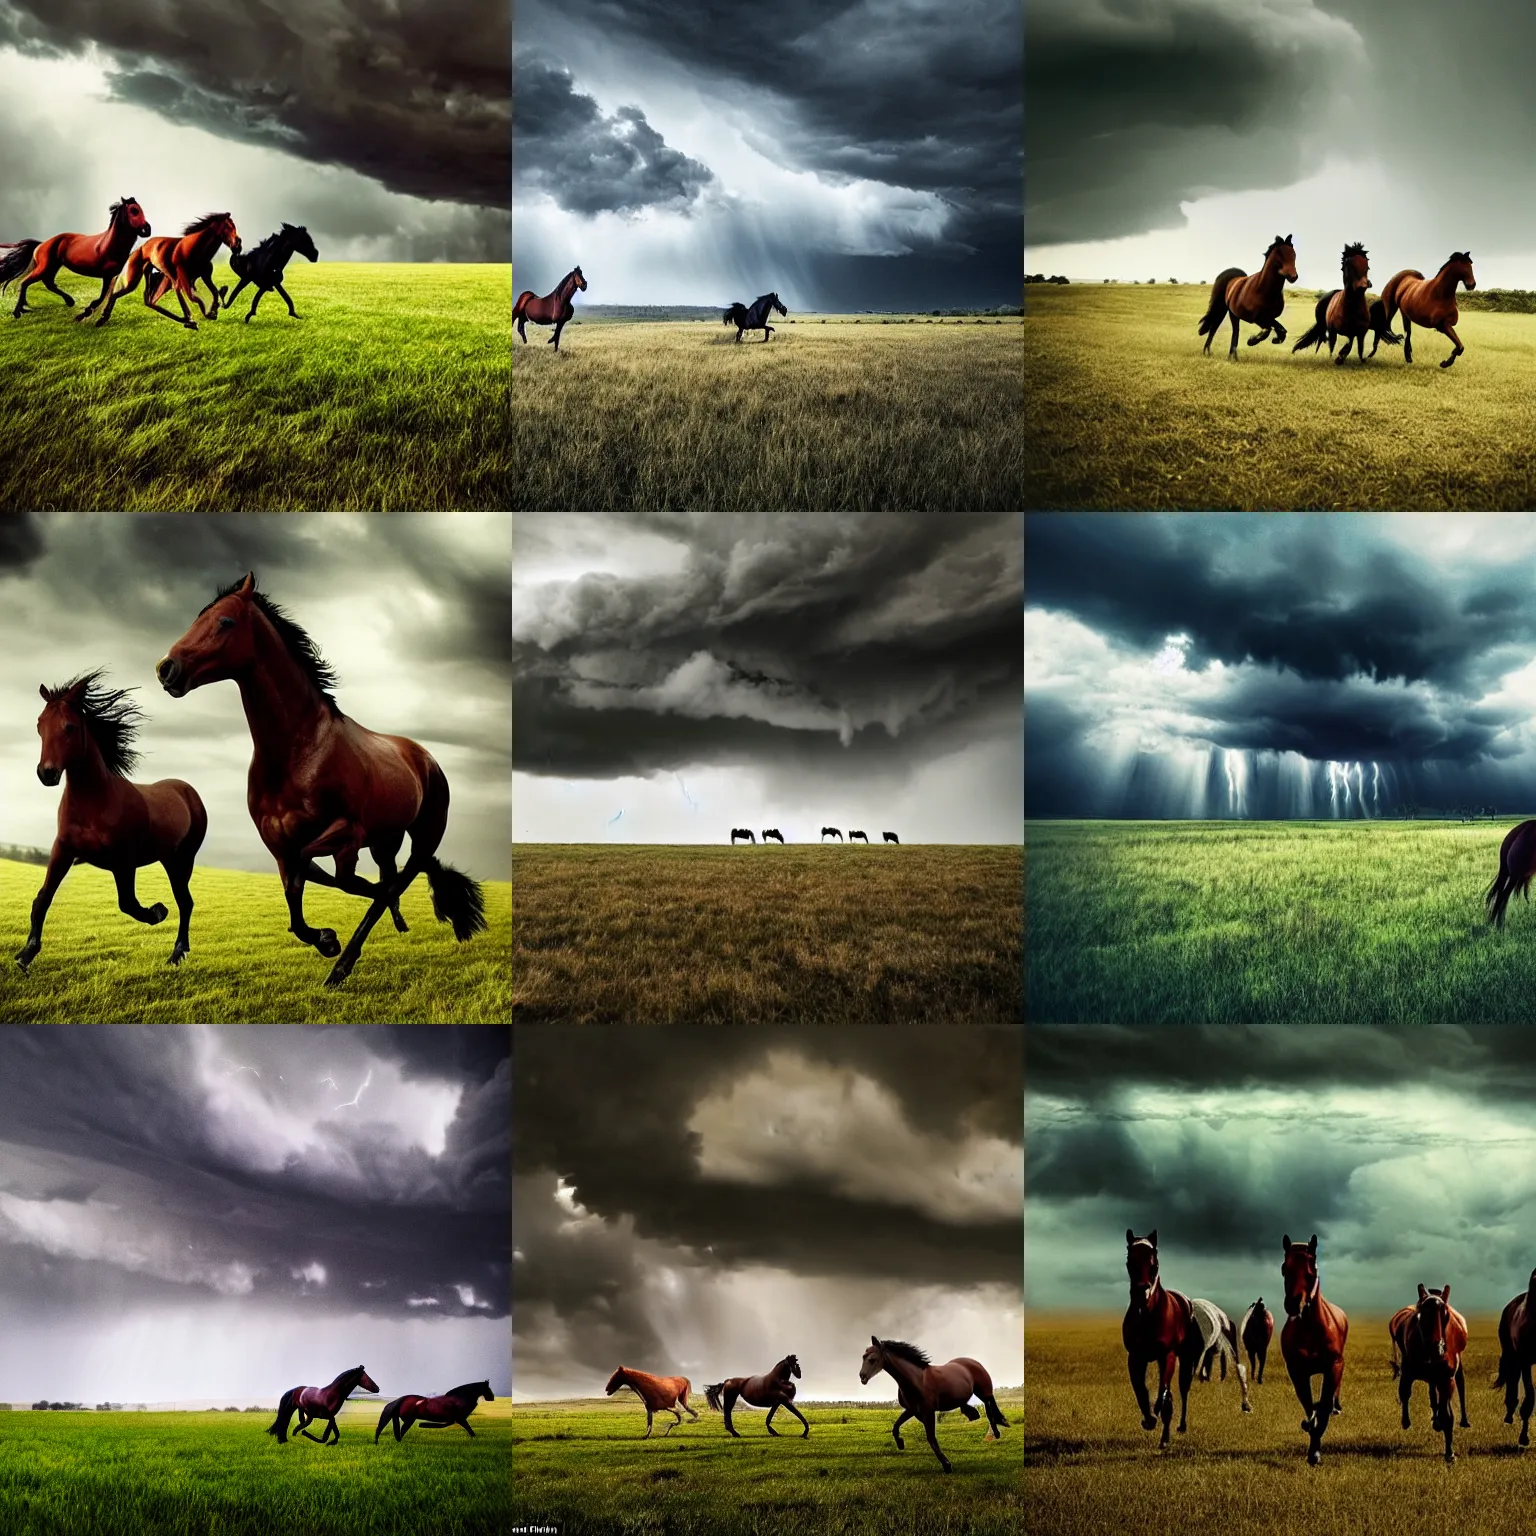 Prompt: epic scene, tense moment, intense, horses running, storm coming, dark sky, very tall grass, wind blowing, cinematic shot